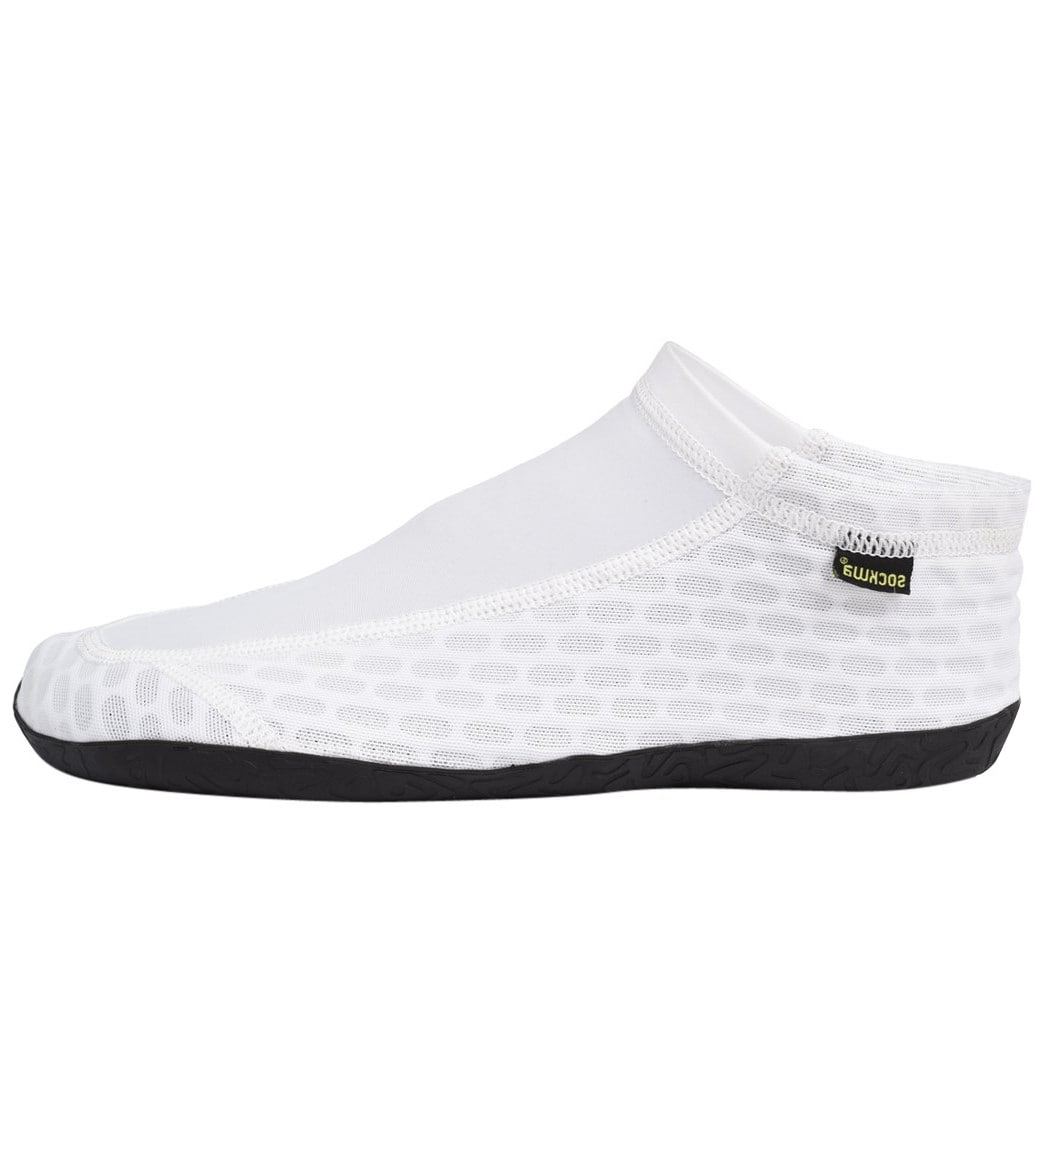 Sockwa X8 Water Shoes - White W6/M5 - Swimoutlet.com